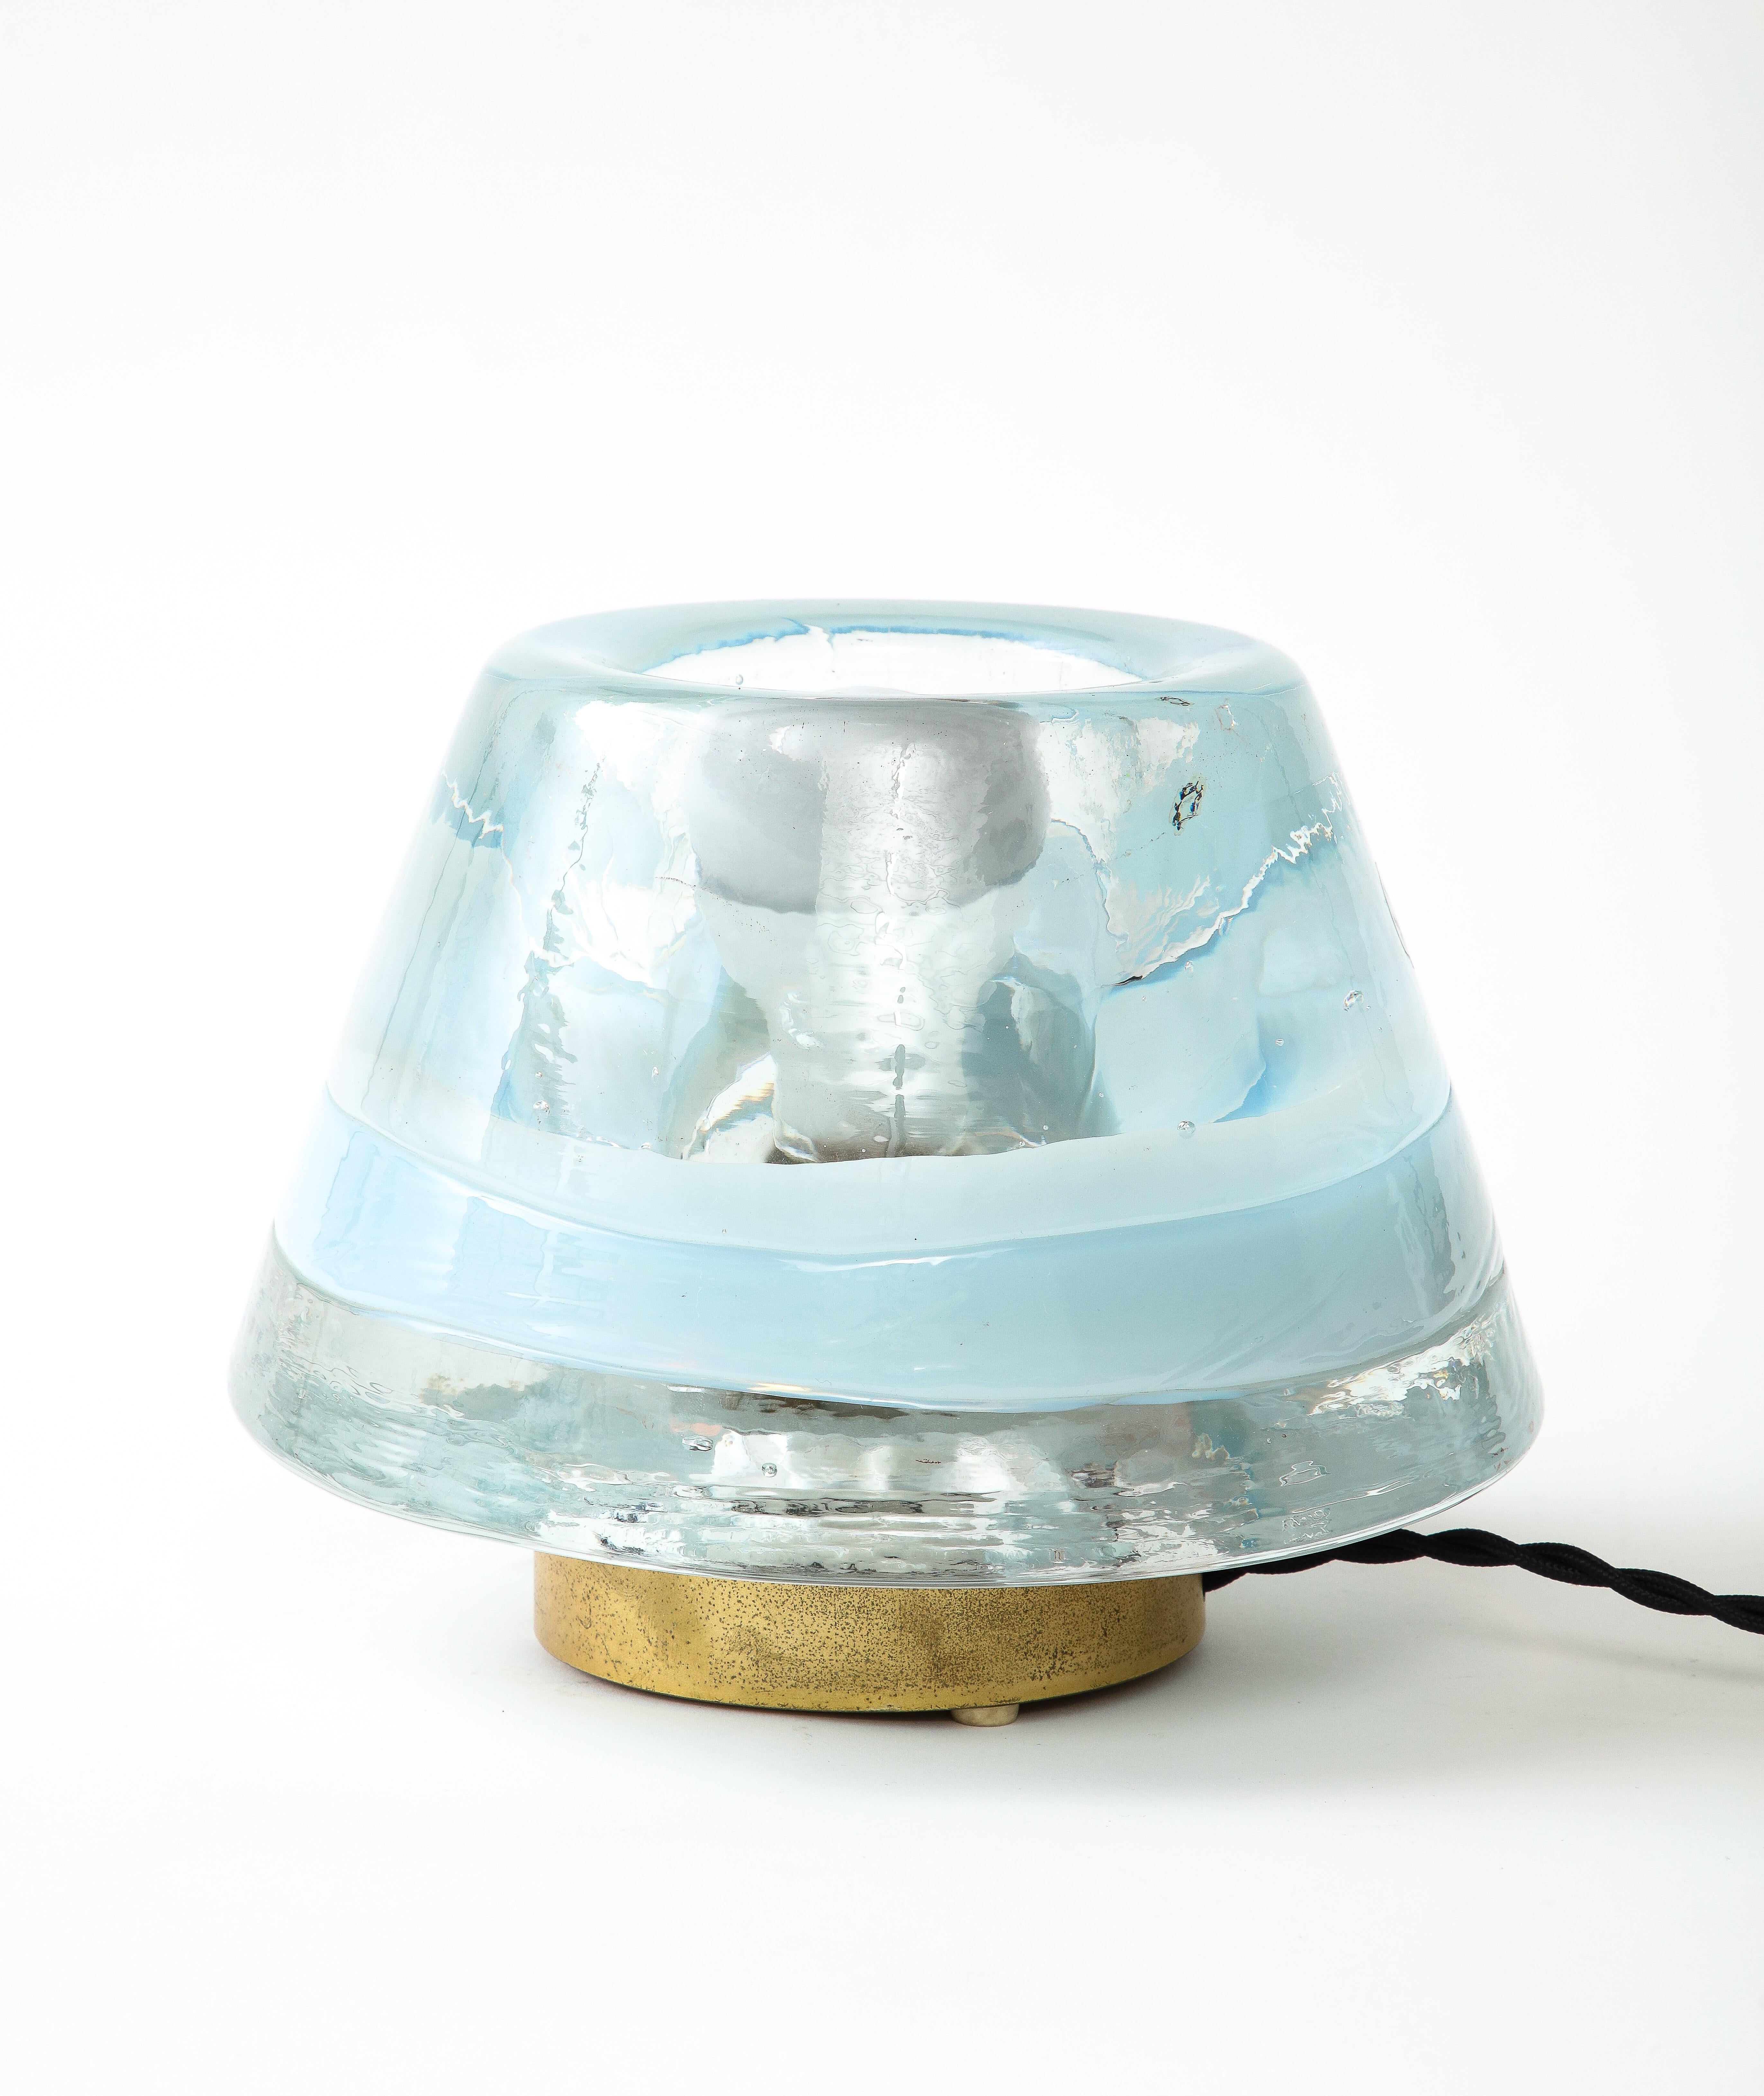 Ethereal vintage table lamp by Renato Toso and Roberto Pamio for Leucos.